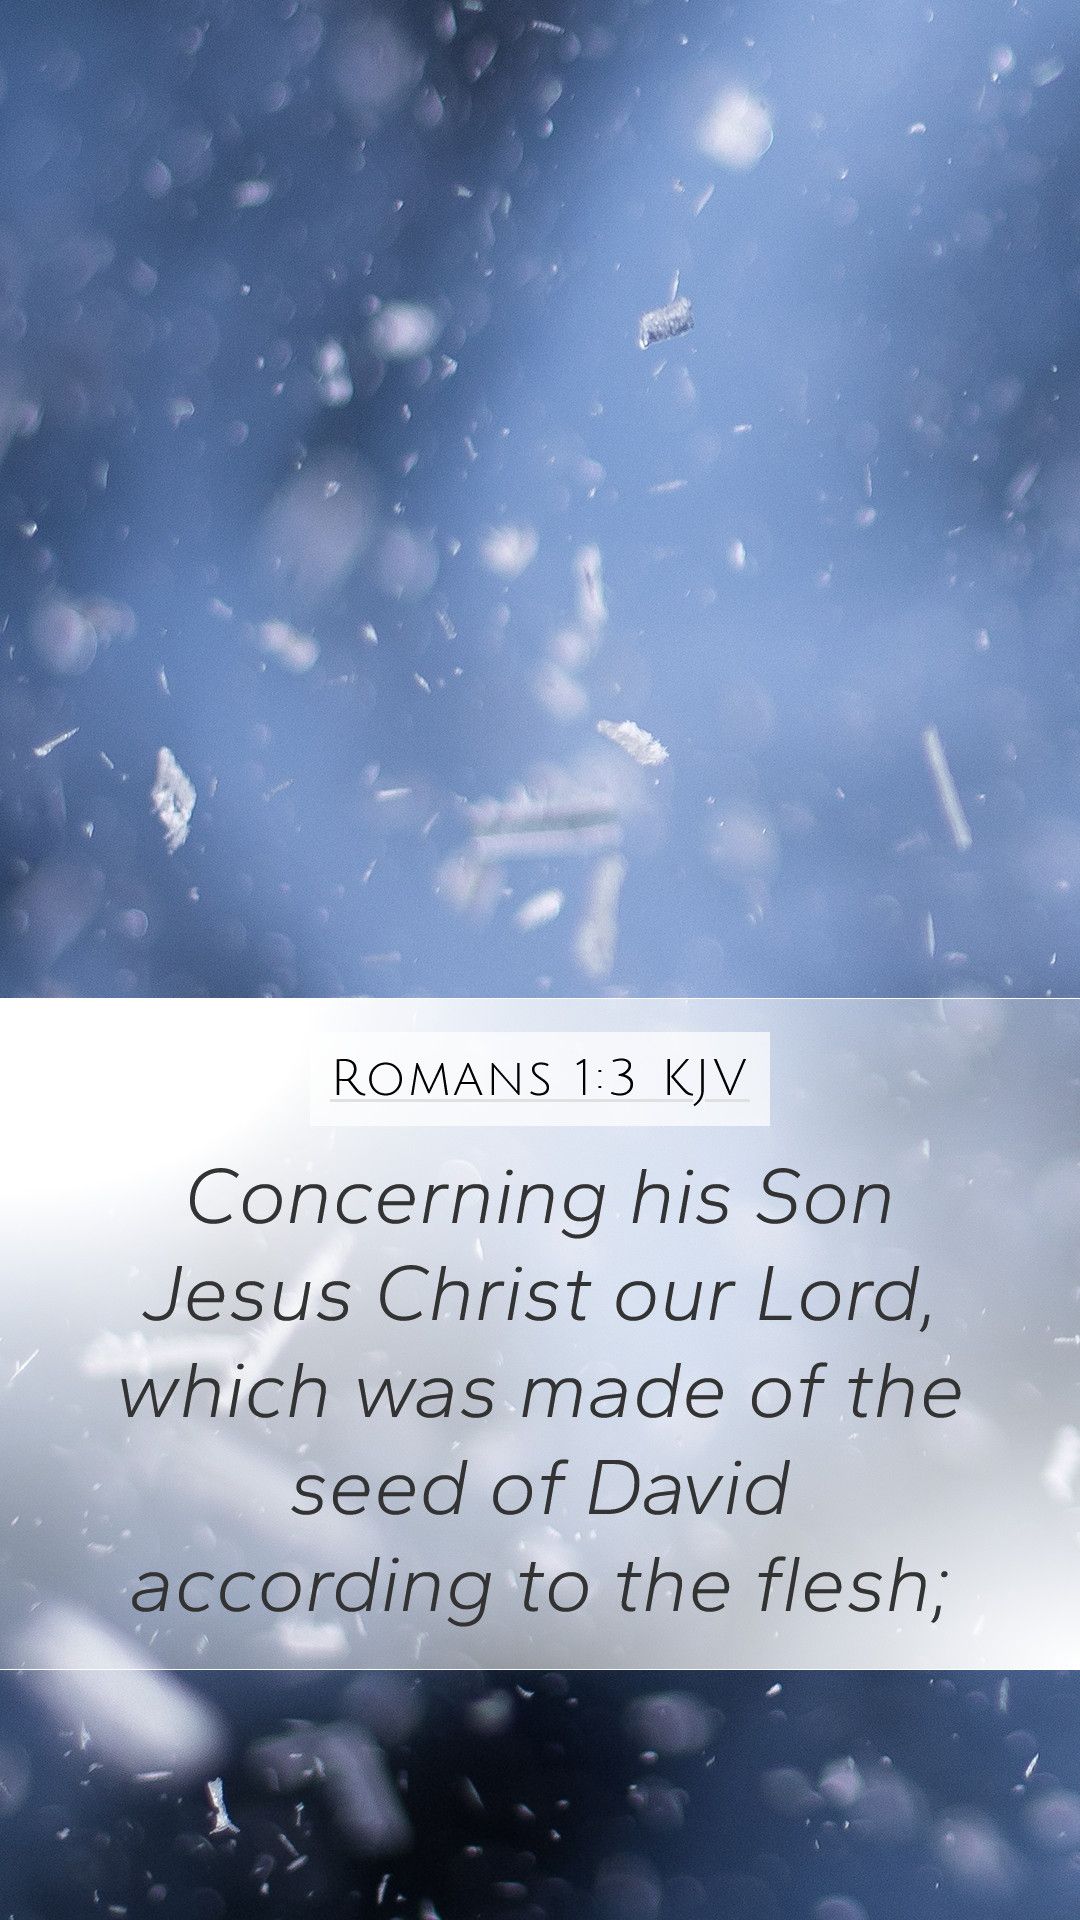 Romans 1:3 - KJV - Concerning his Son Jesus Christ our Lord, which was made of the seed of David according to the flesh; - Christian